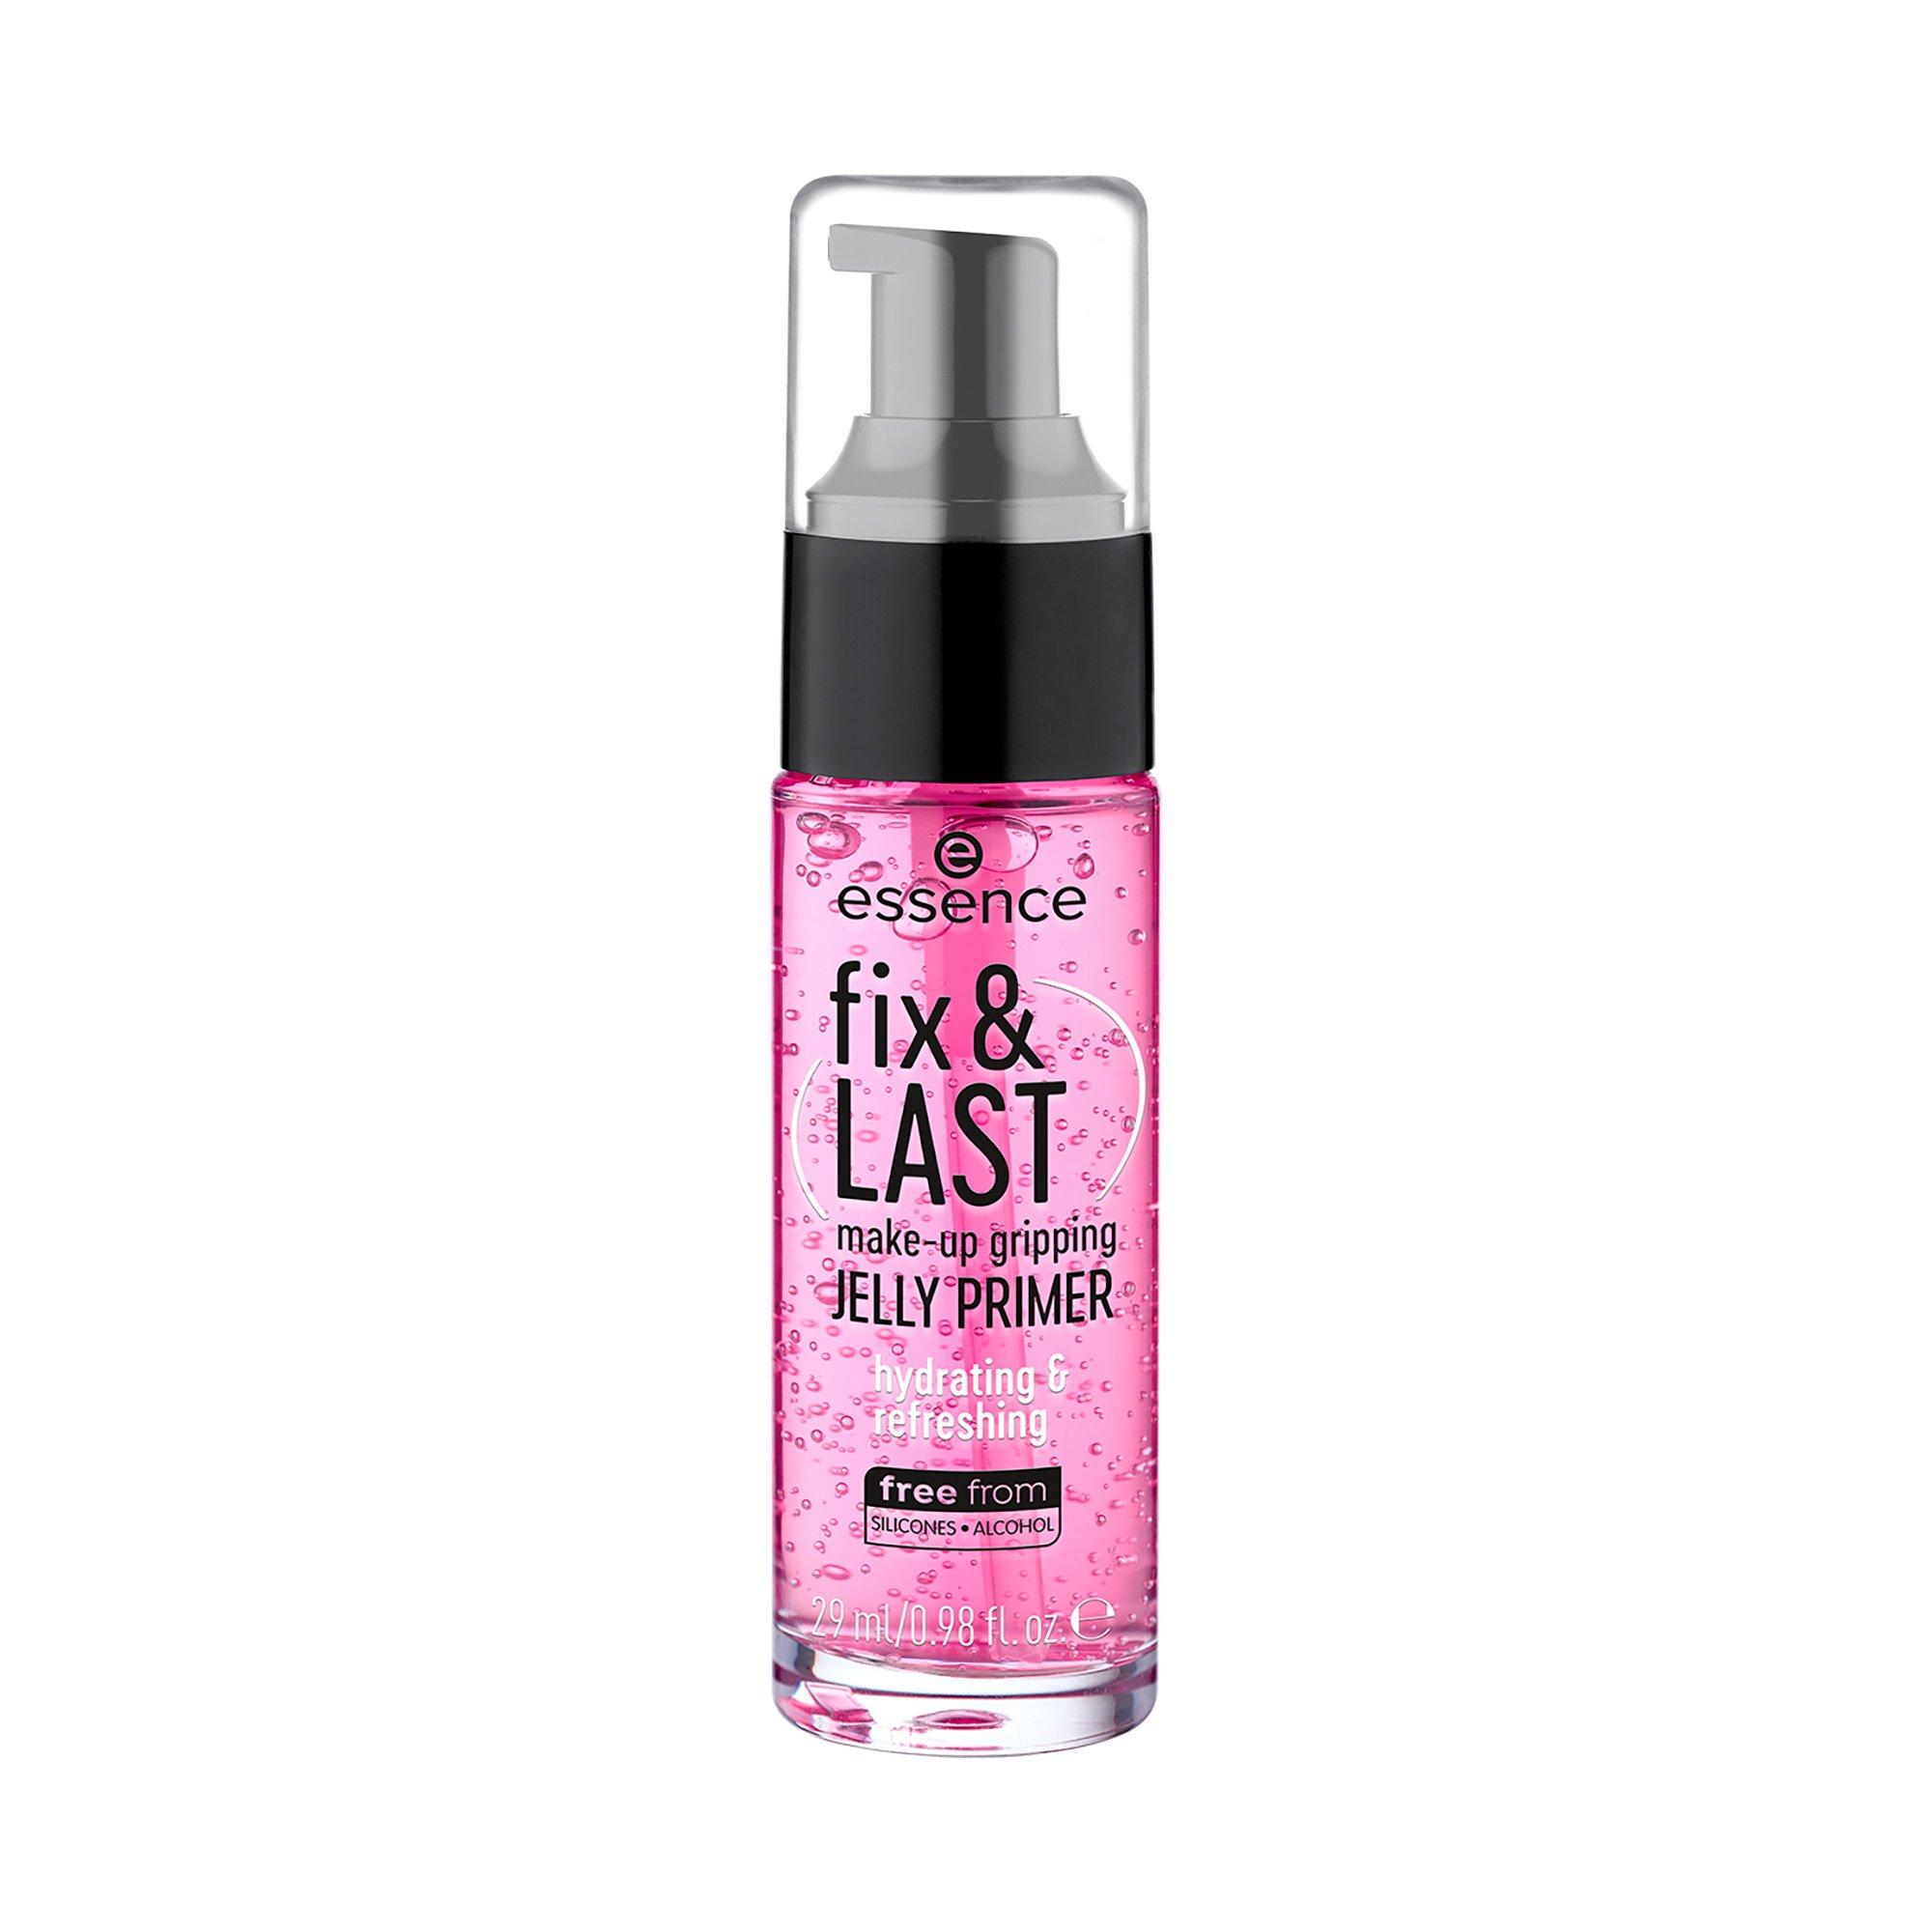 Image of essence Fix & Last Make-Up Gripping Jelly Primer - 29ML